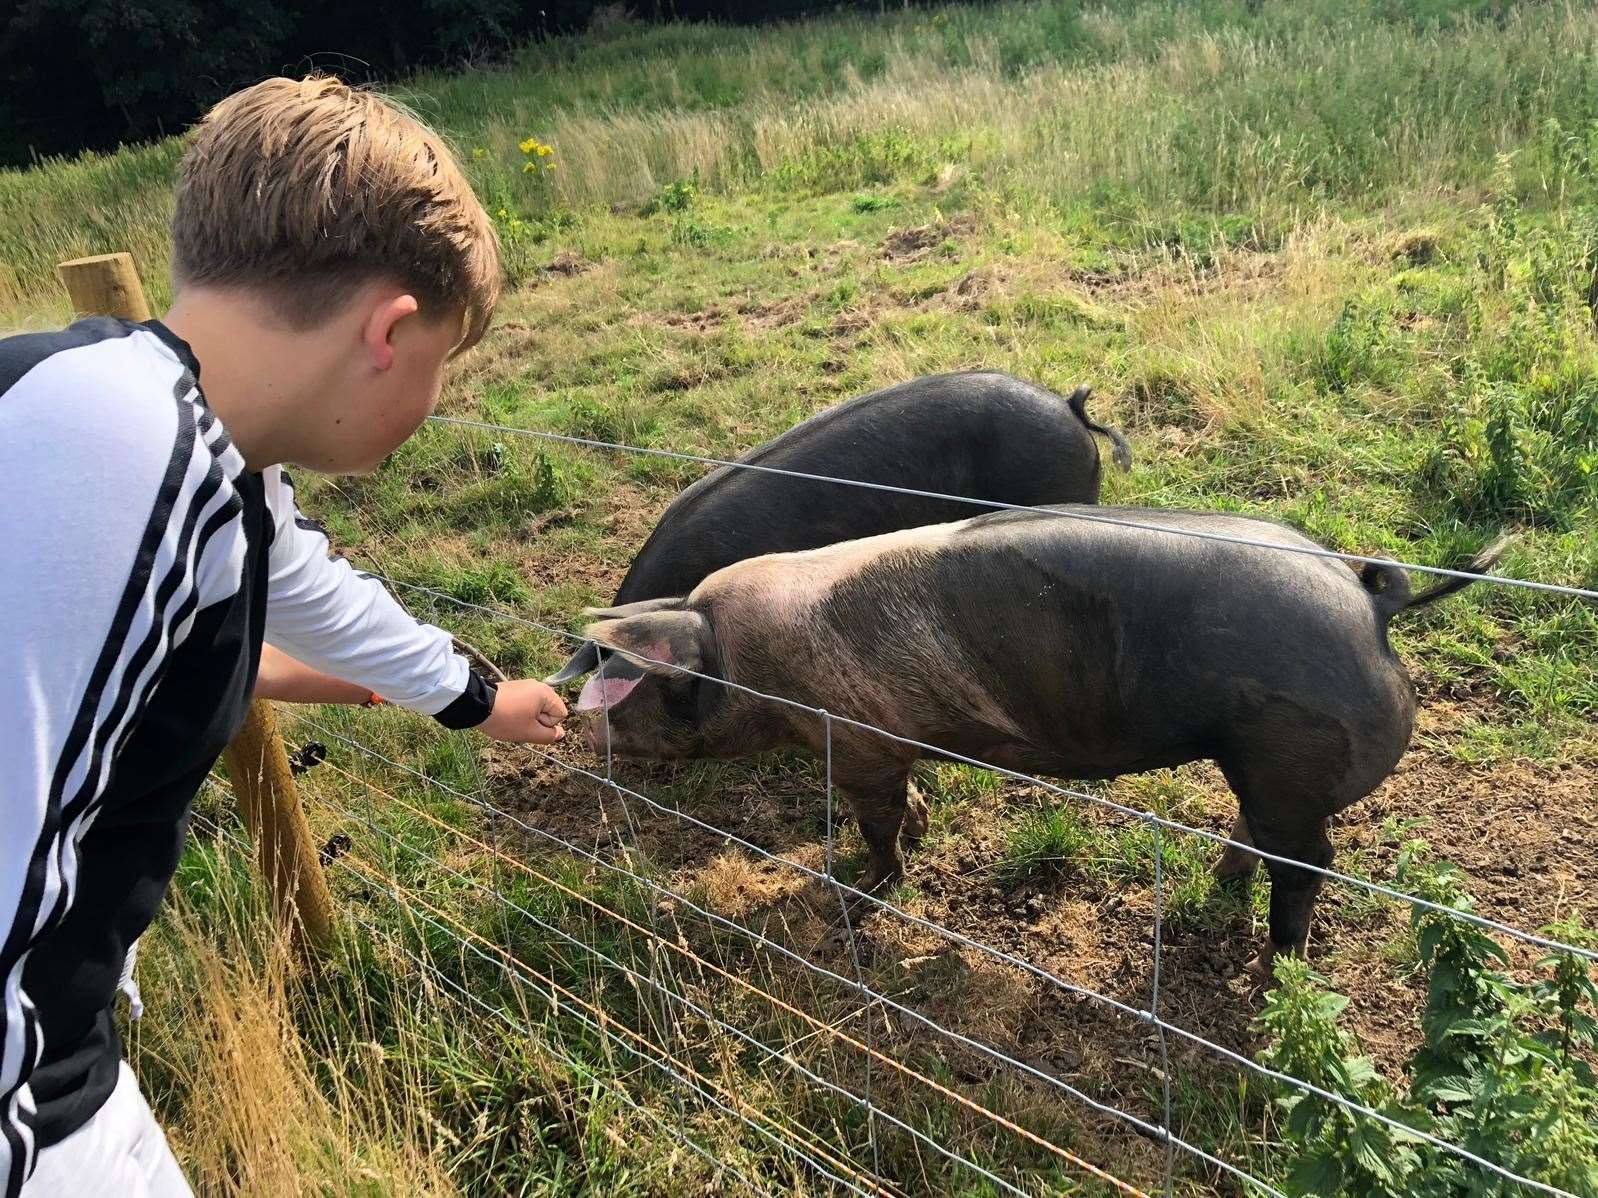 Zak saying hello to the pigs